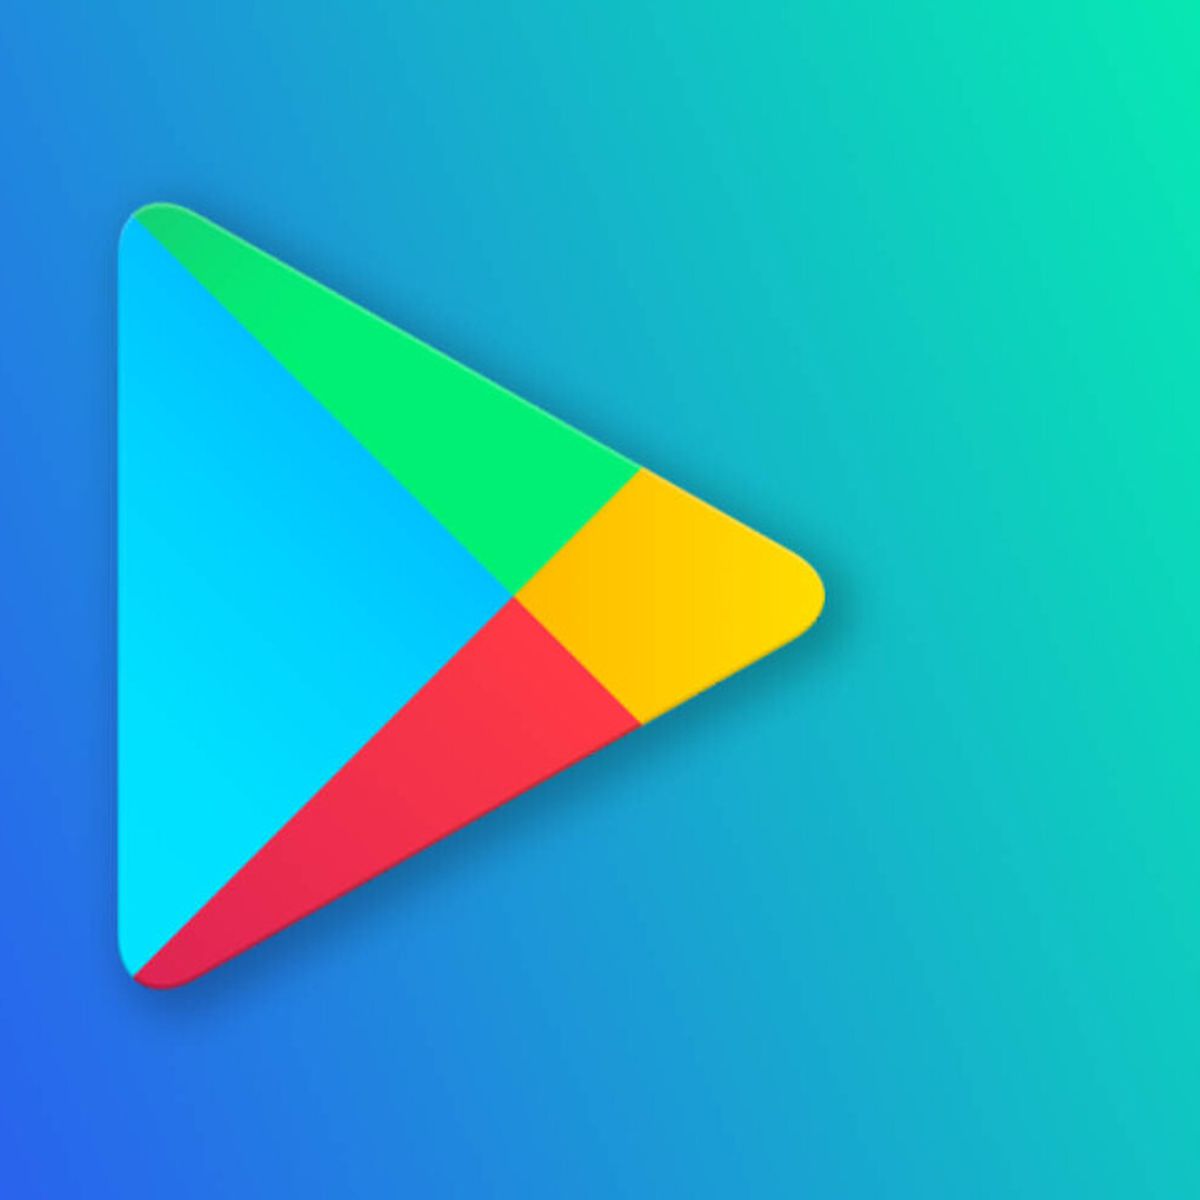 Google users will share $630 million after its Play store settlement